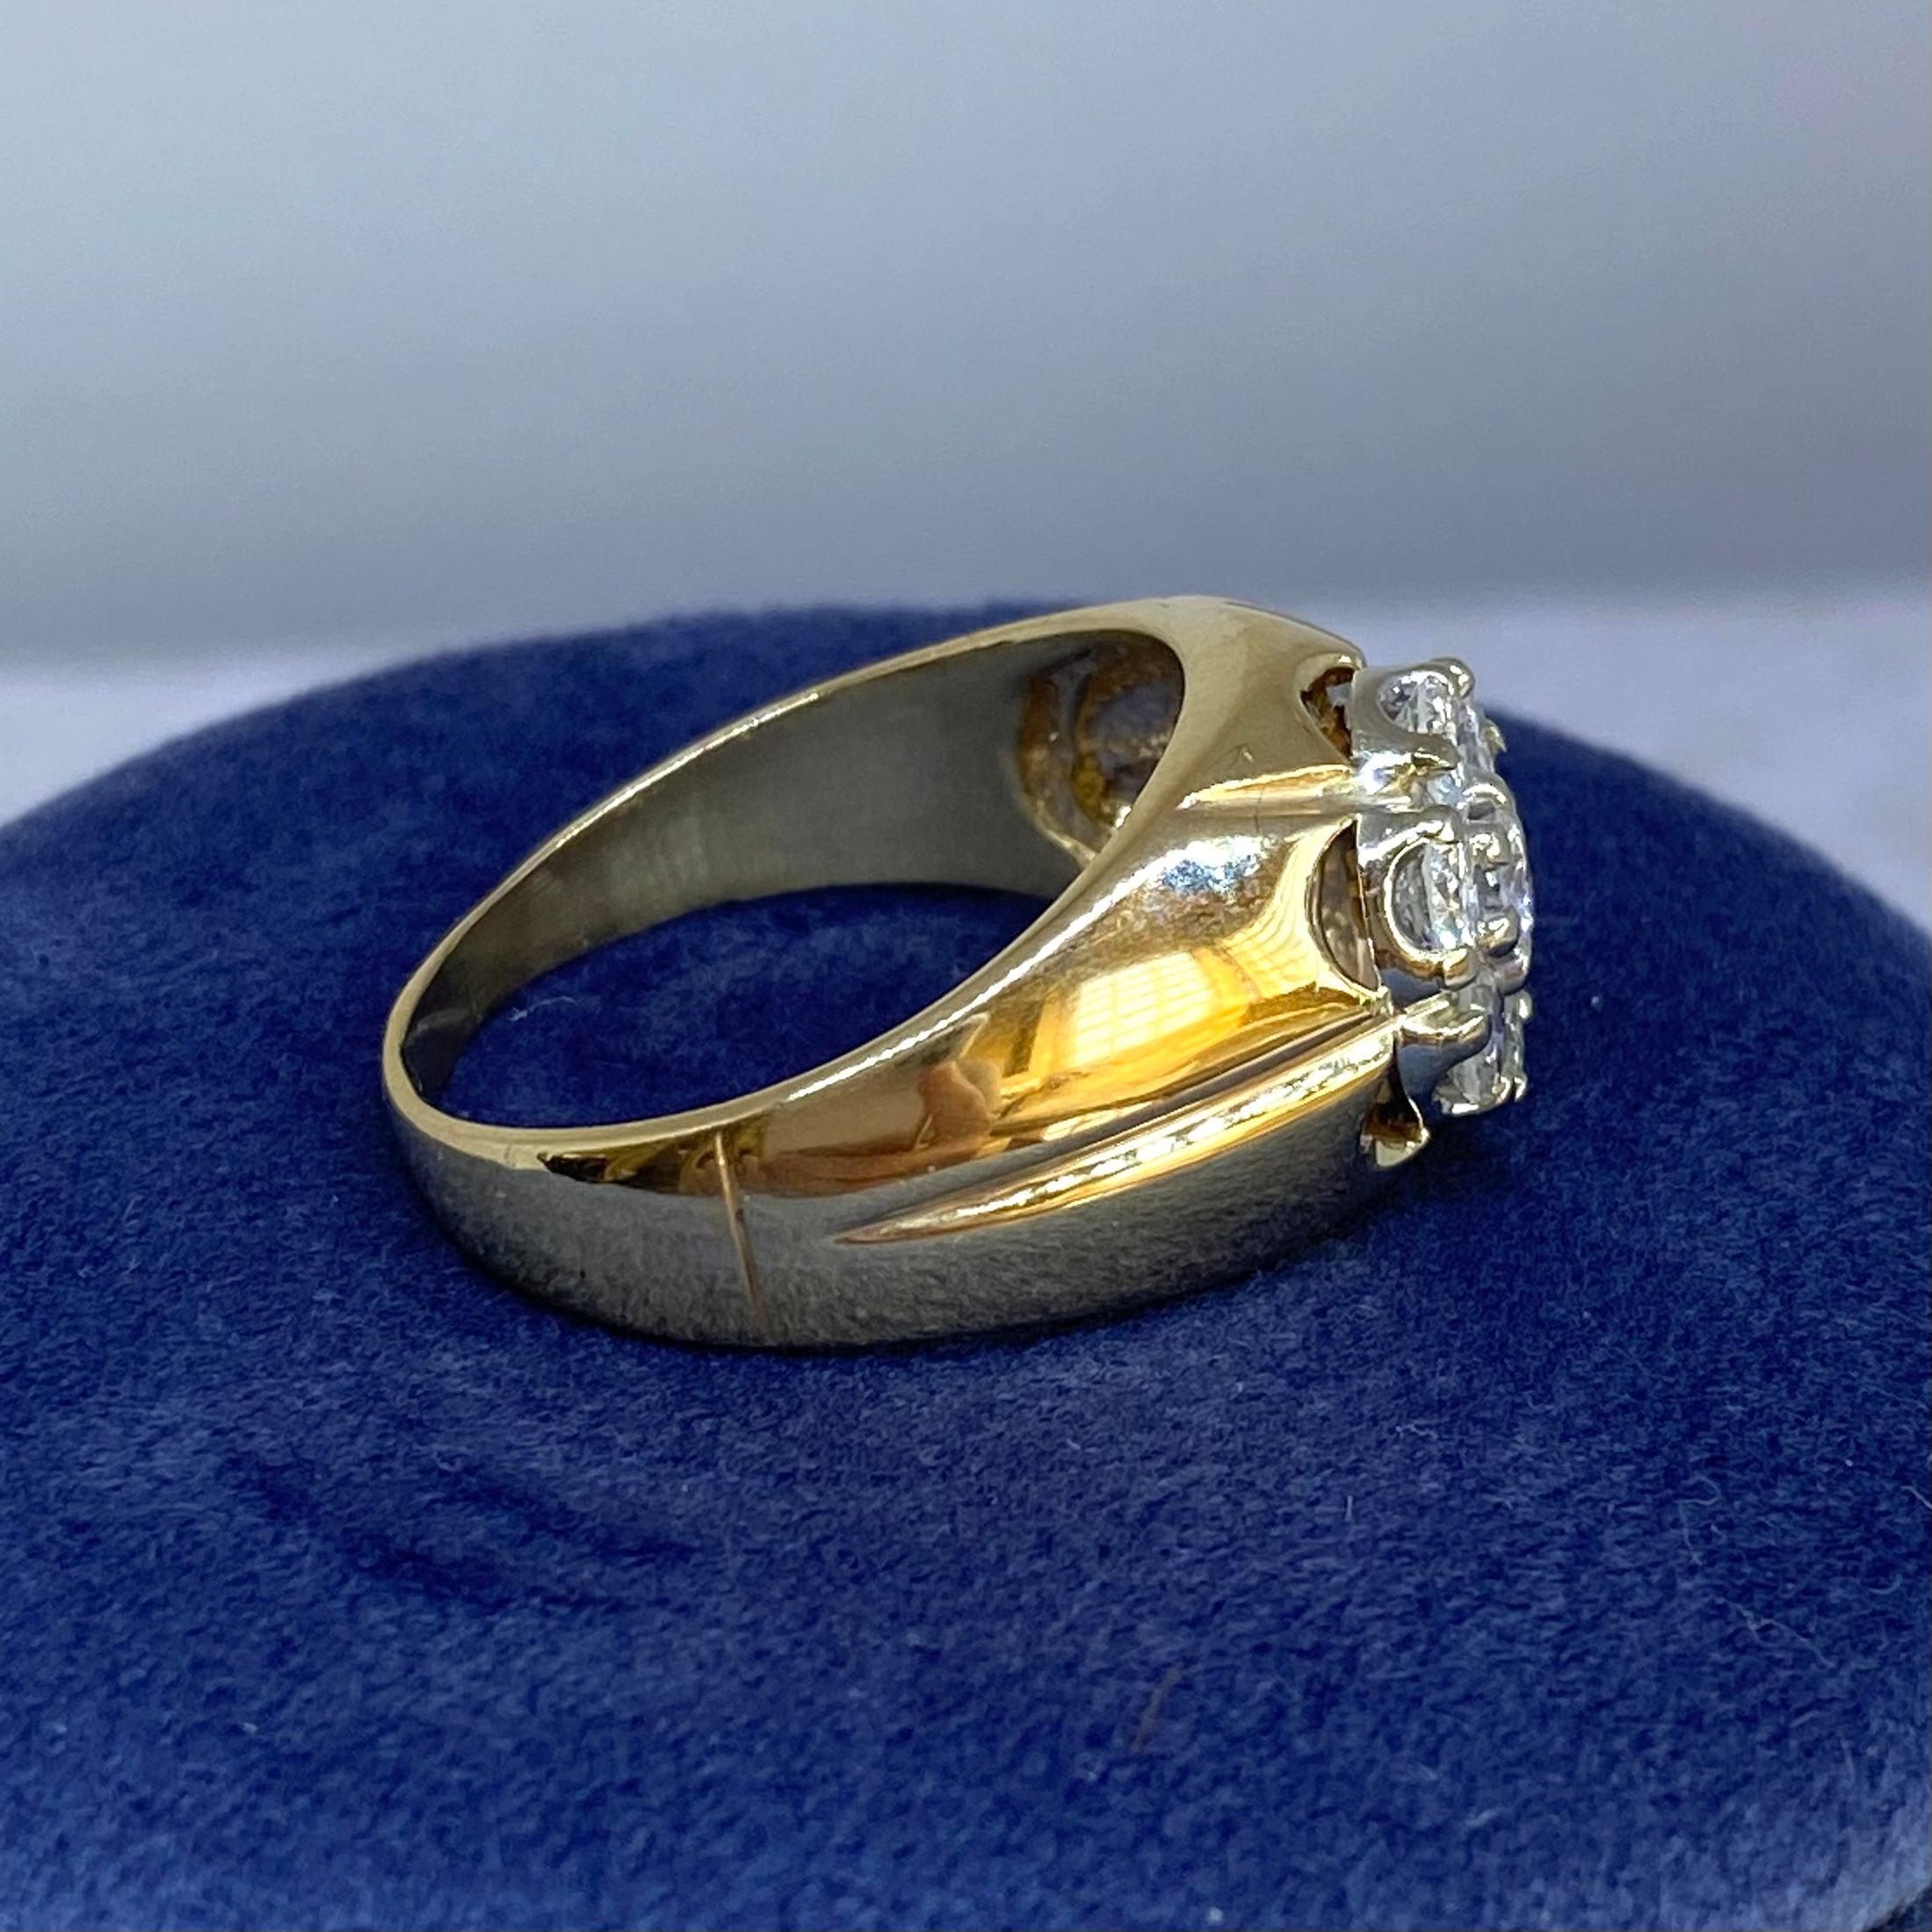 Vintage 14K Gold Seven Stone Diamond Cluster Ring Size 9.75 In Good Condition For Sale In Henderson, NV